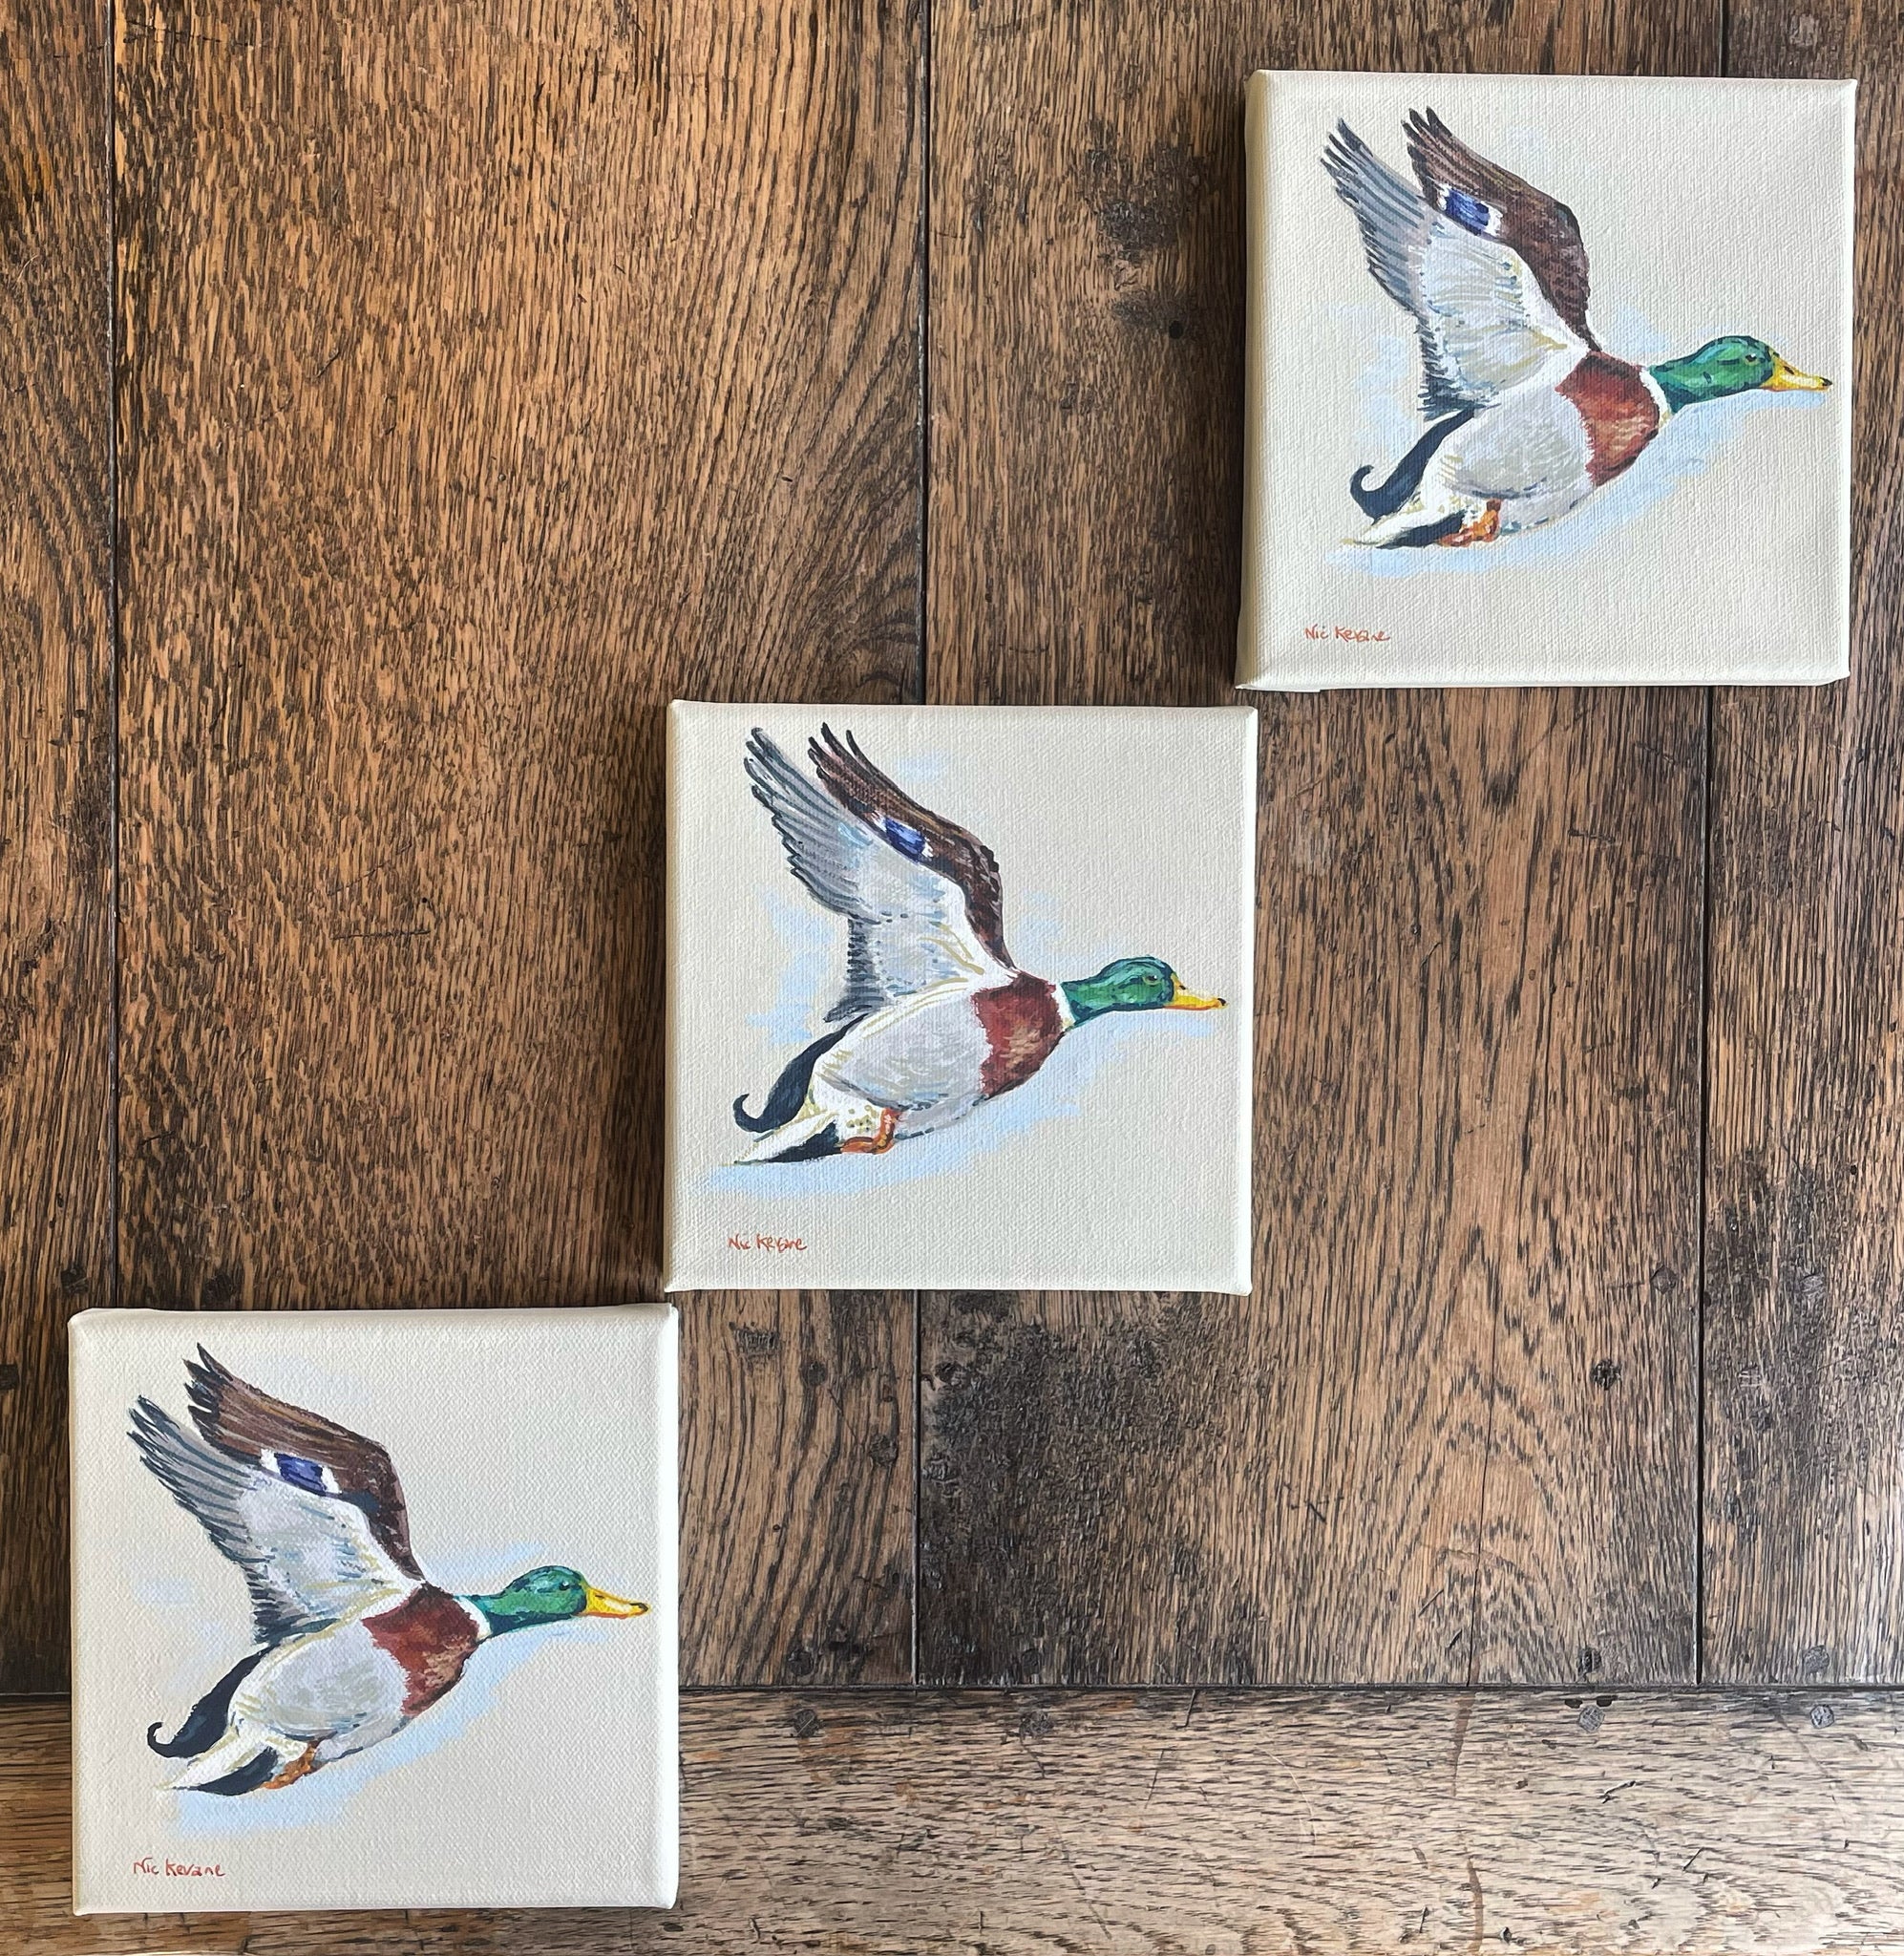 Flying Ducks - My mini paintings depict various countryside subjects painted on soft off-white backgrounds.